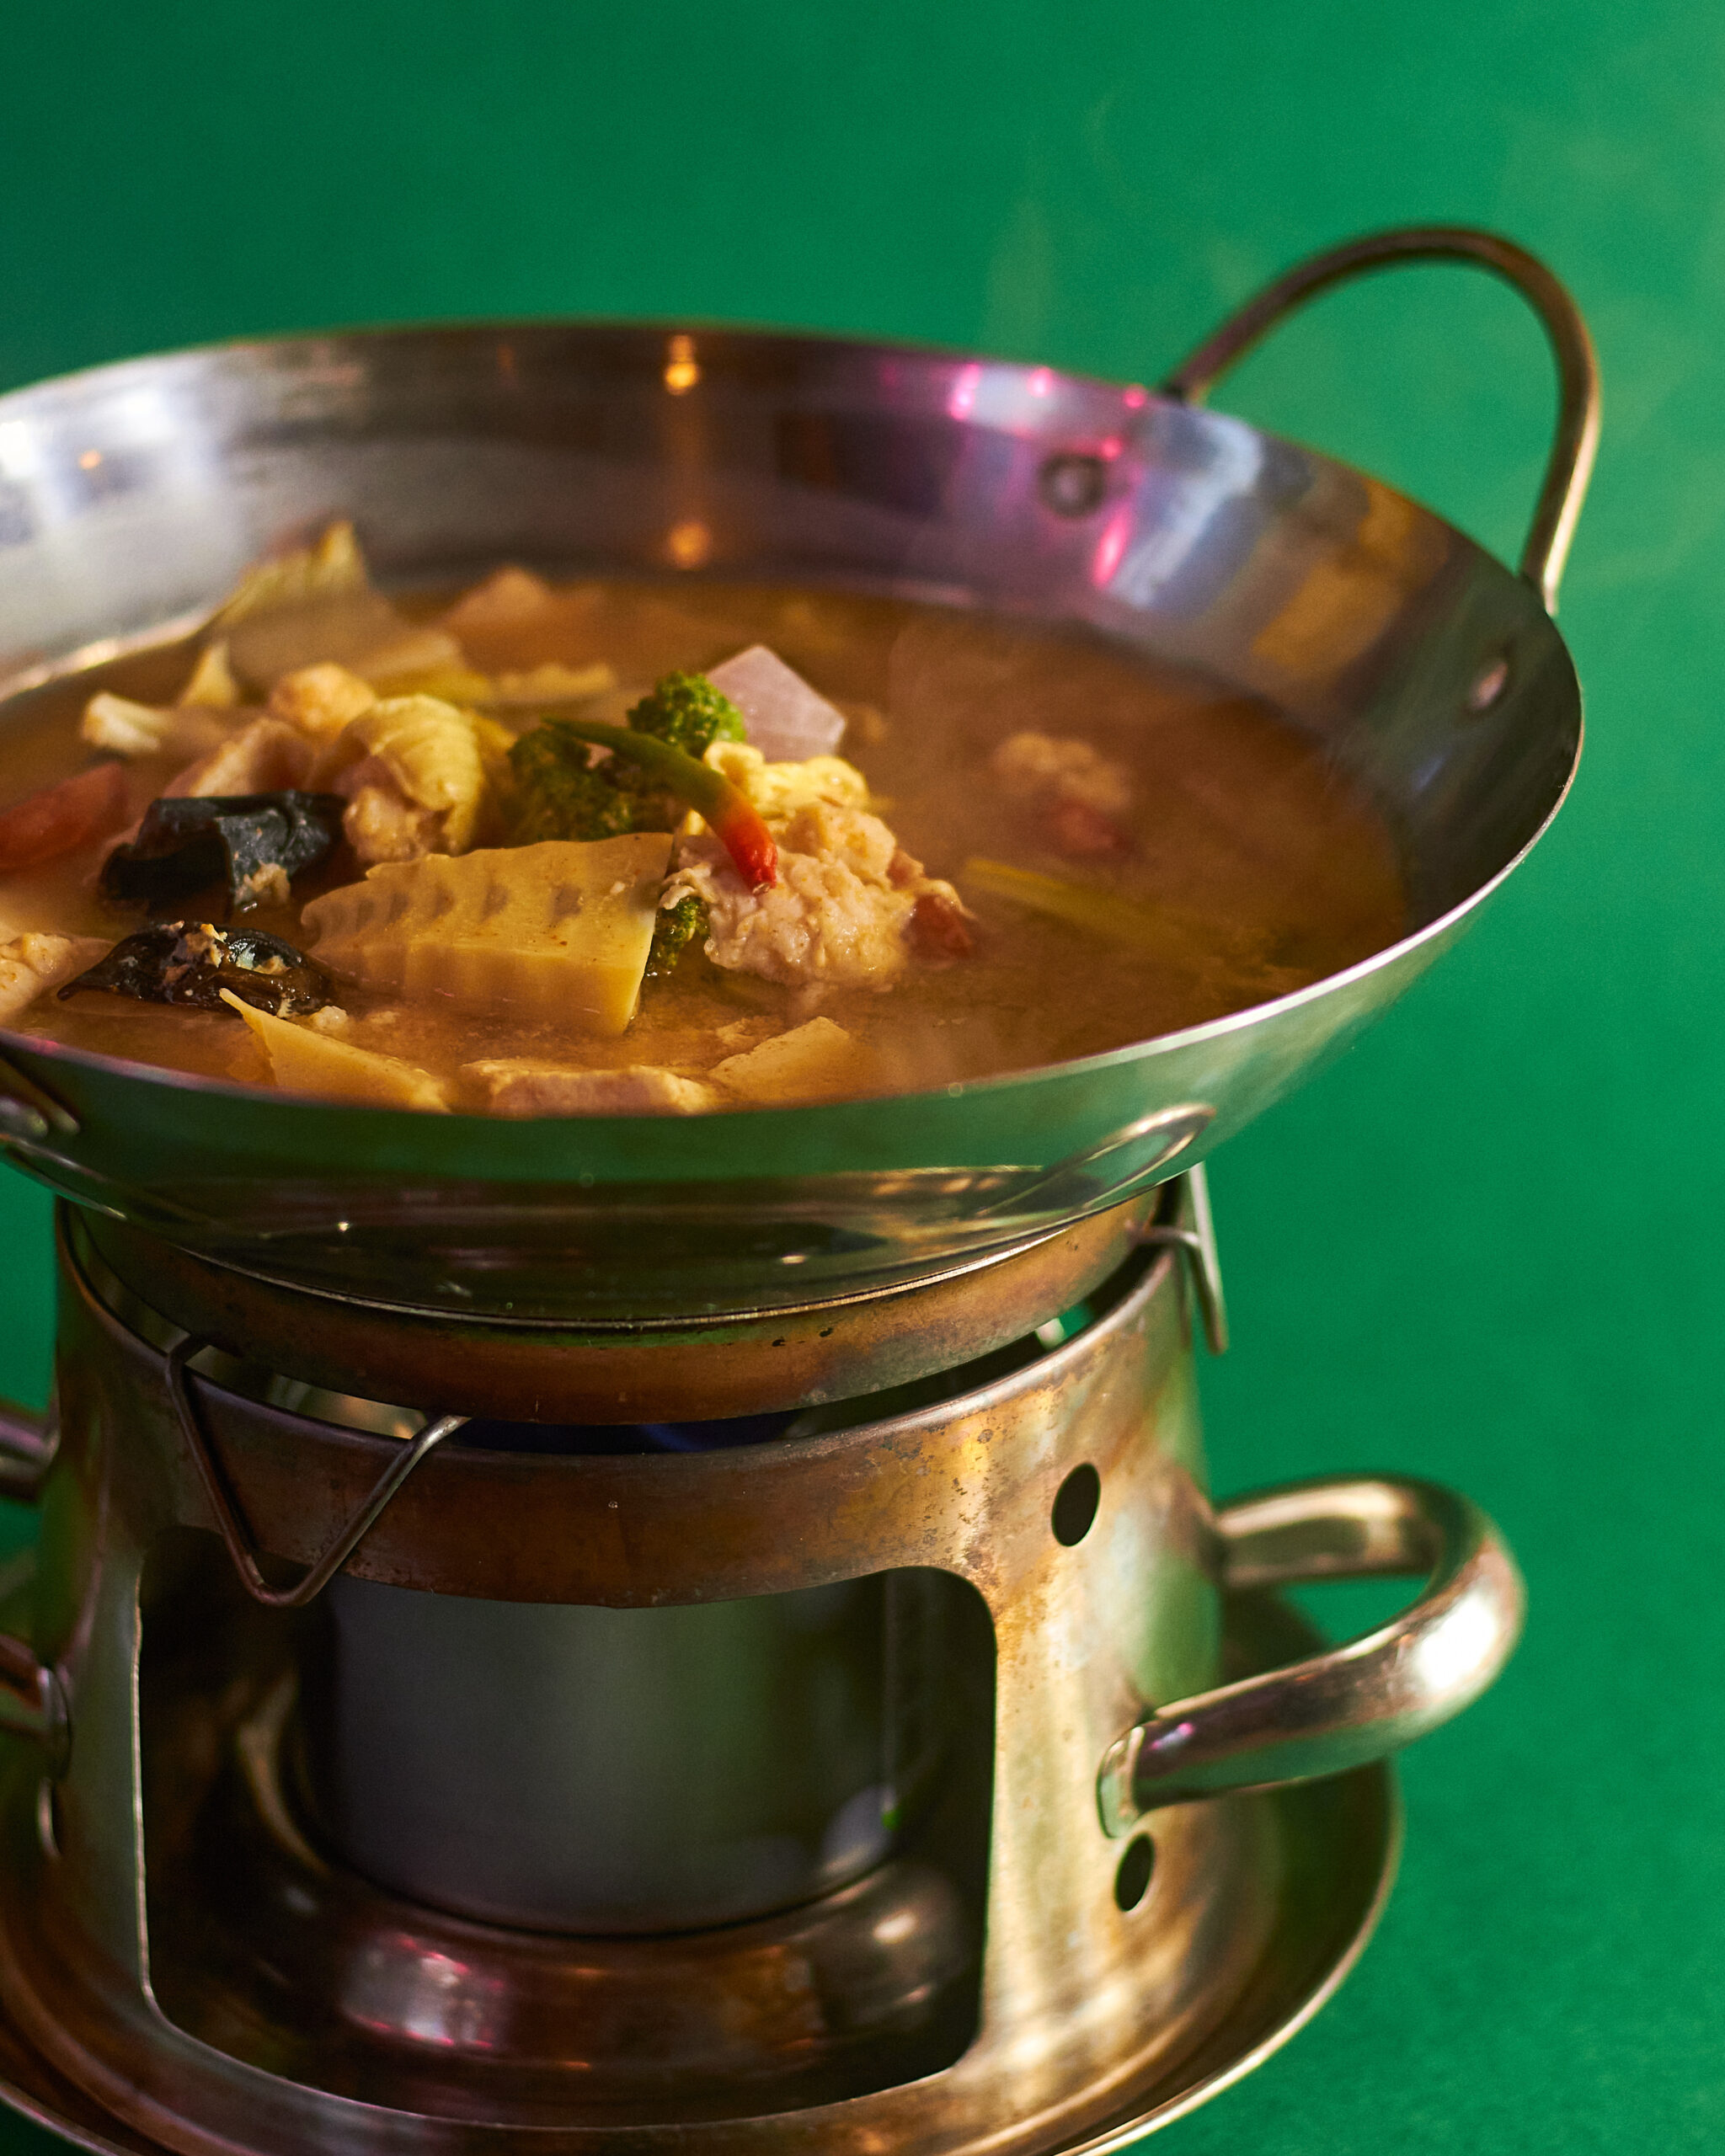 This classic soup tantalizes your taste buds with a balance of savory, spicy, and sour flavors. Tender chicken mingles with crisp vegetables in a vibrant broth, sure to warm you up from within.